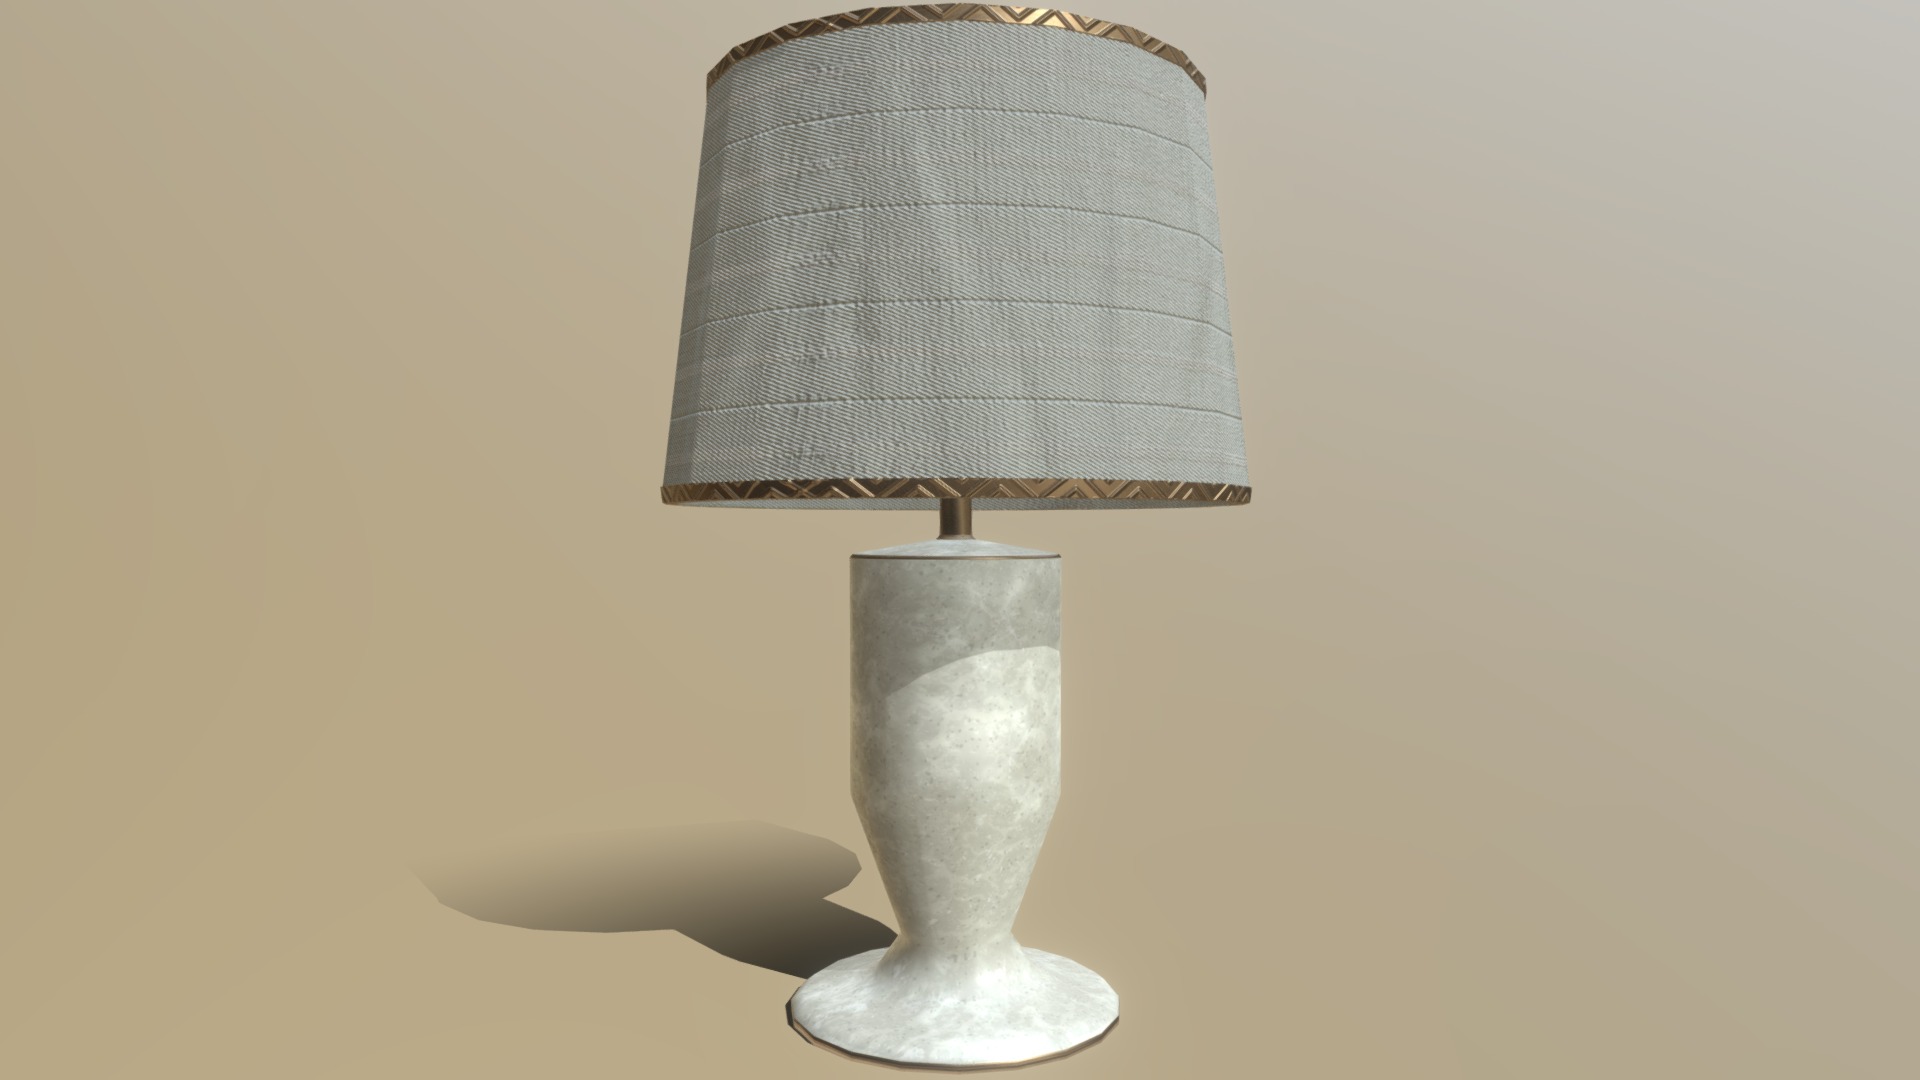 3D model Superfuntimes Simple Table Lamp 1 - This is a 3D model of the Superfuntimes Simple Table Lamp 1. The 3D model is about a lamp on a table.